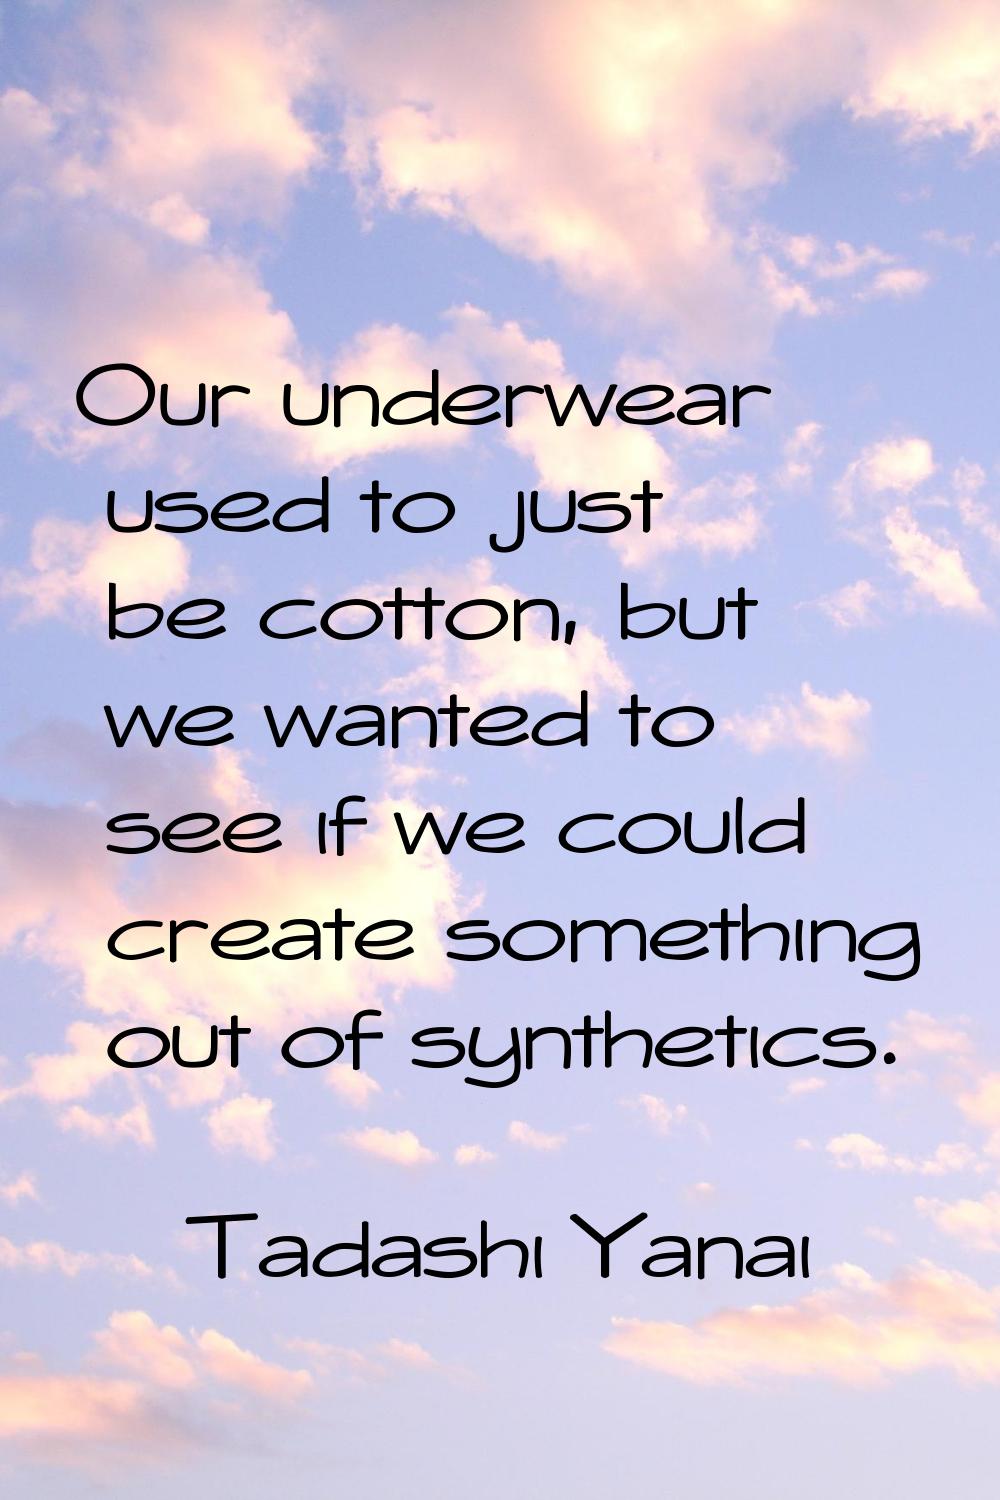 Our underwear used to just be cotton, but we wanted to see if we could create something out of synt